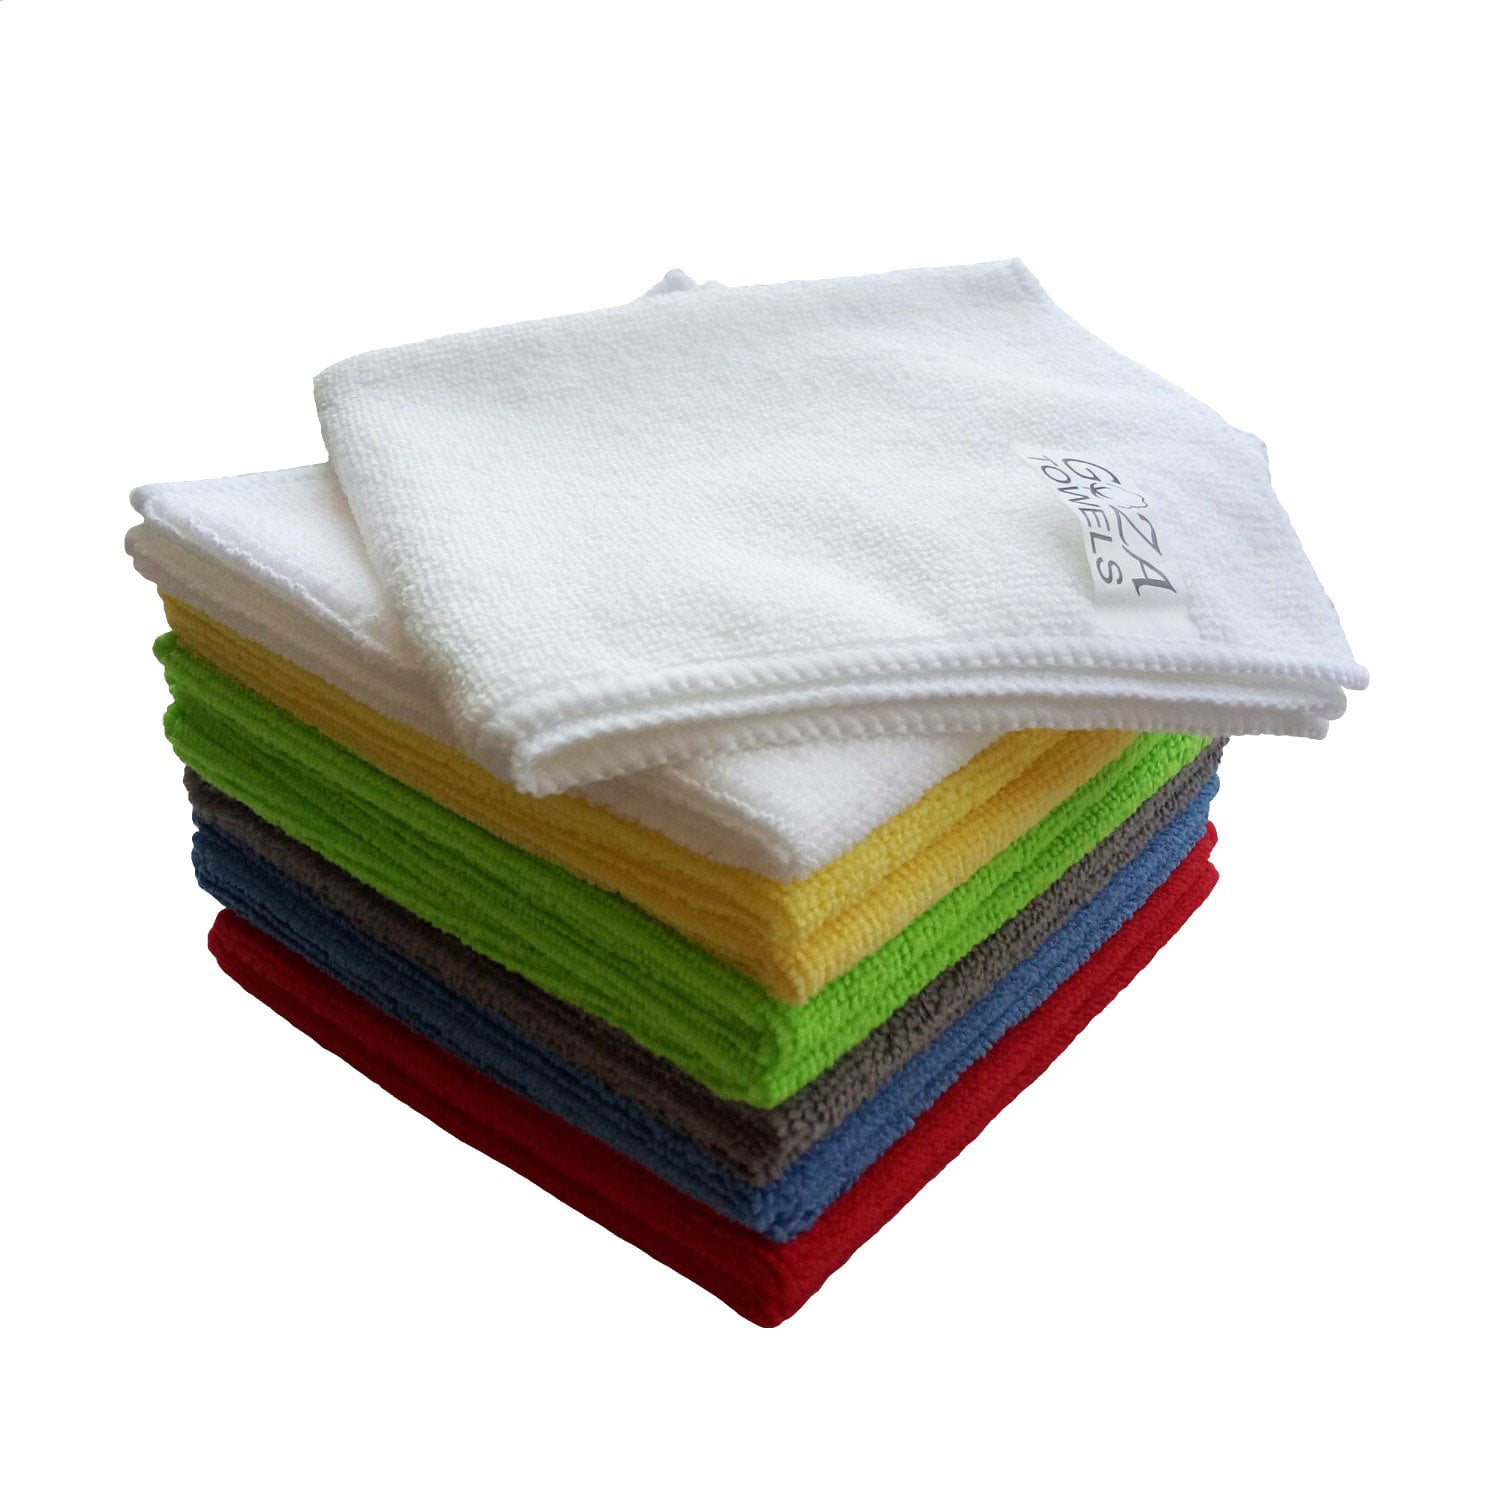 240 Microfiber 14"x14" Cleaning/Auto Detailing Towels MIXED COLORS PRO GRADE 